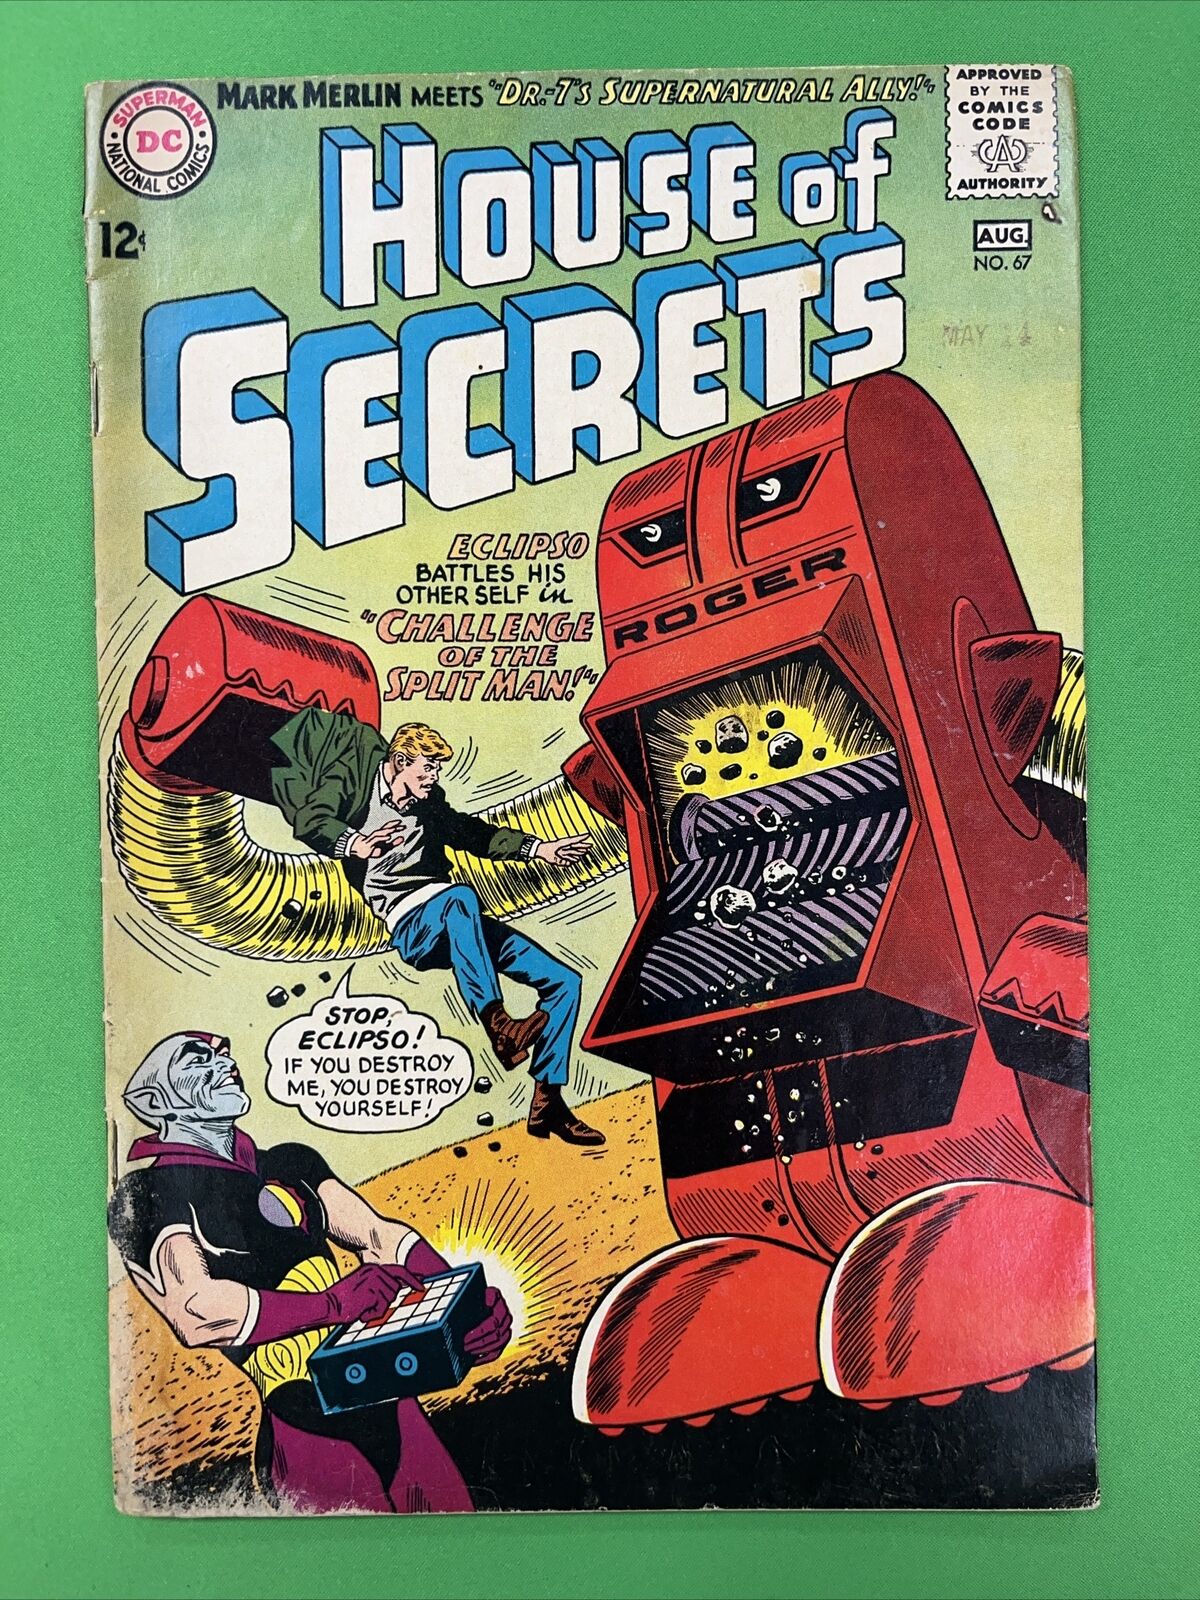 House of Secrets #67 - Silver Age Dick Dillin Cover - Eclipso Appearance